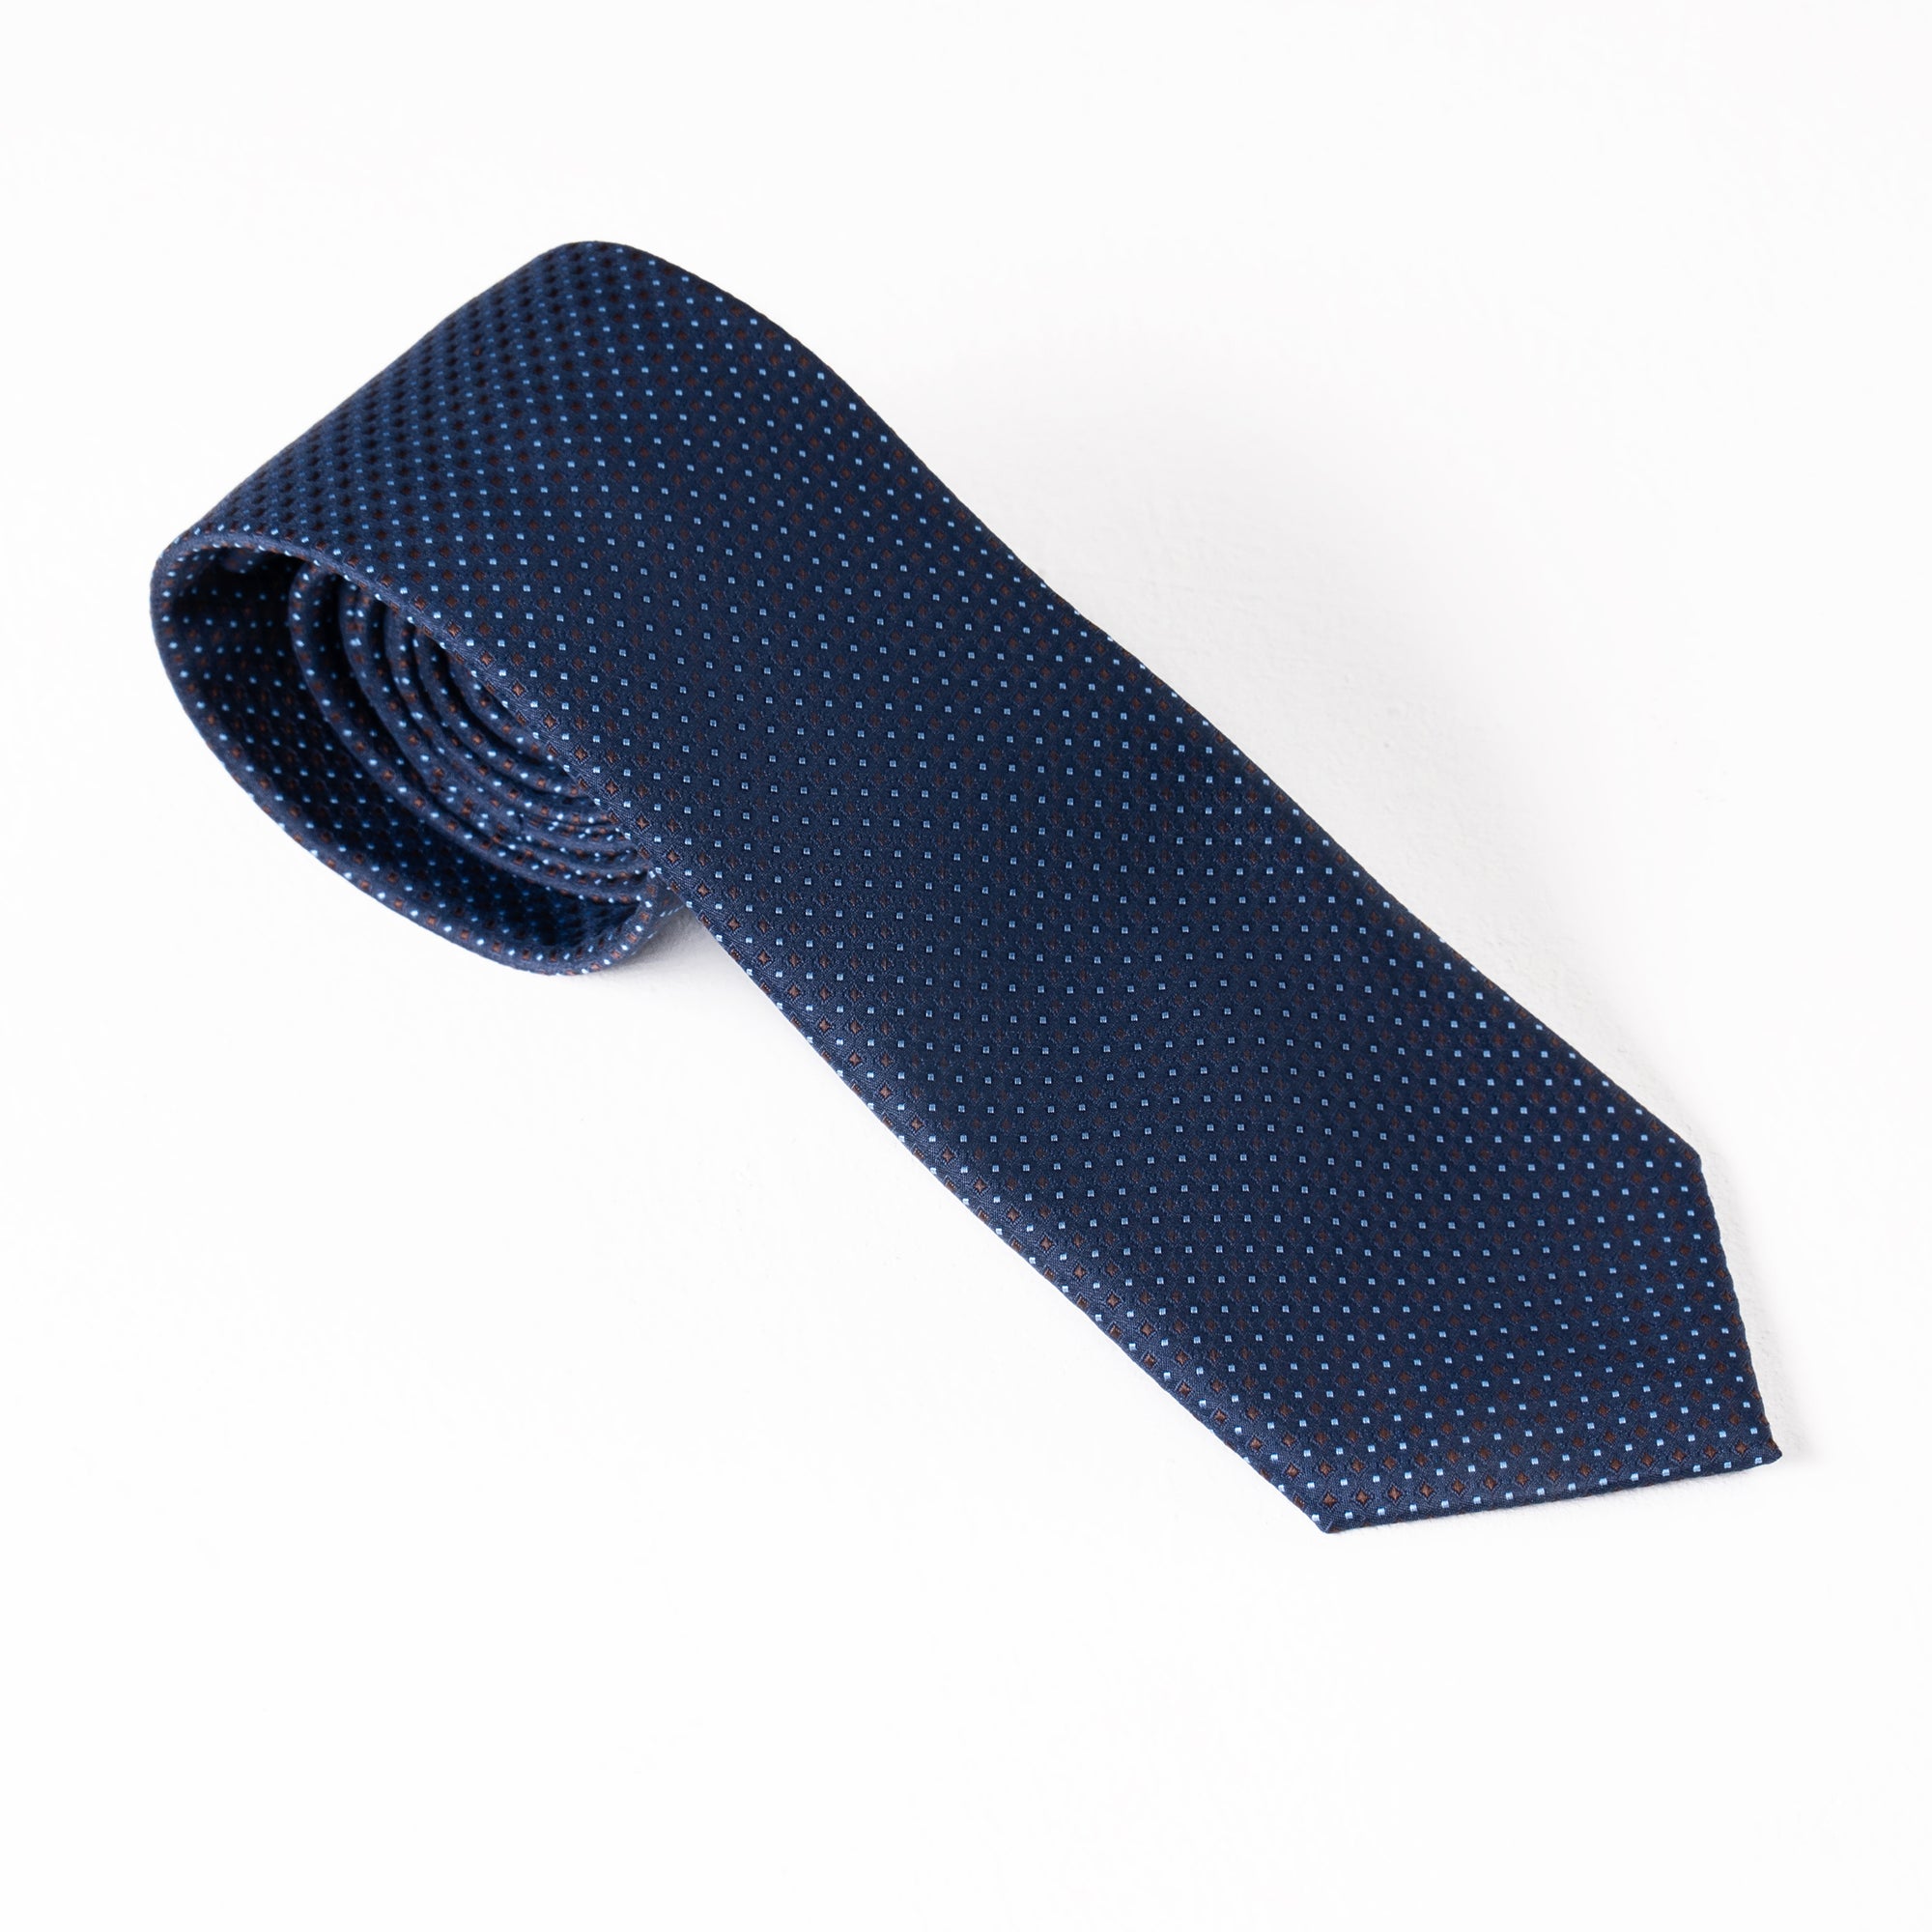 Black & Blue Dotted Tie